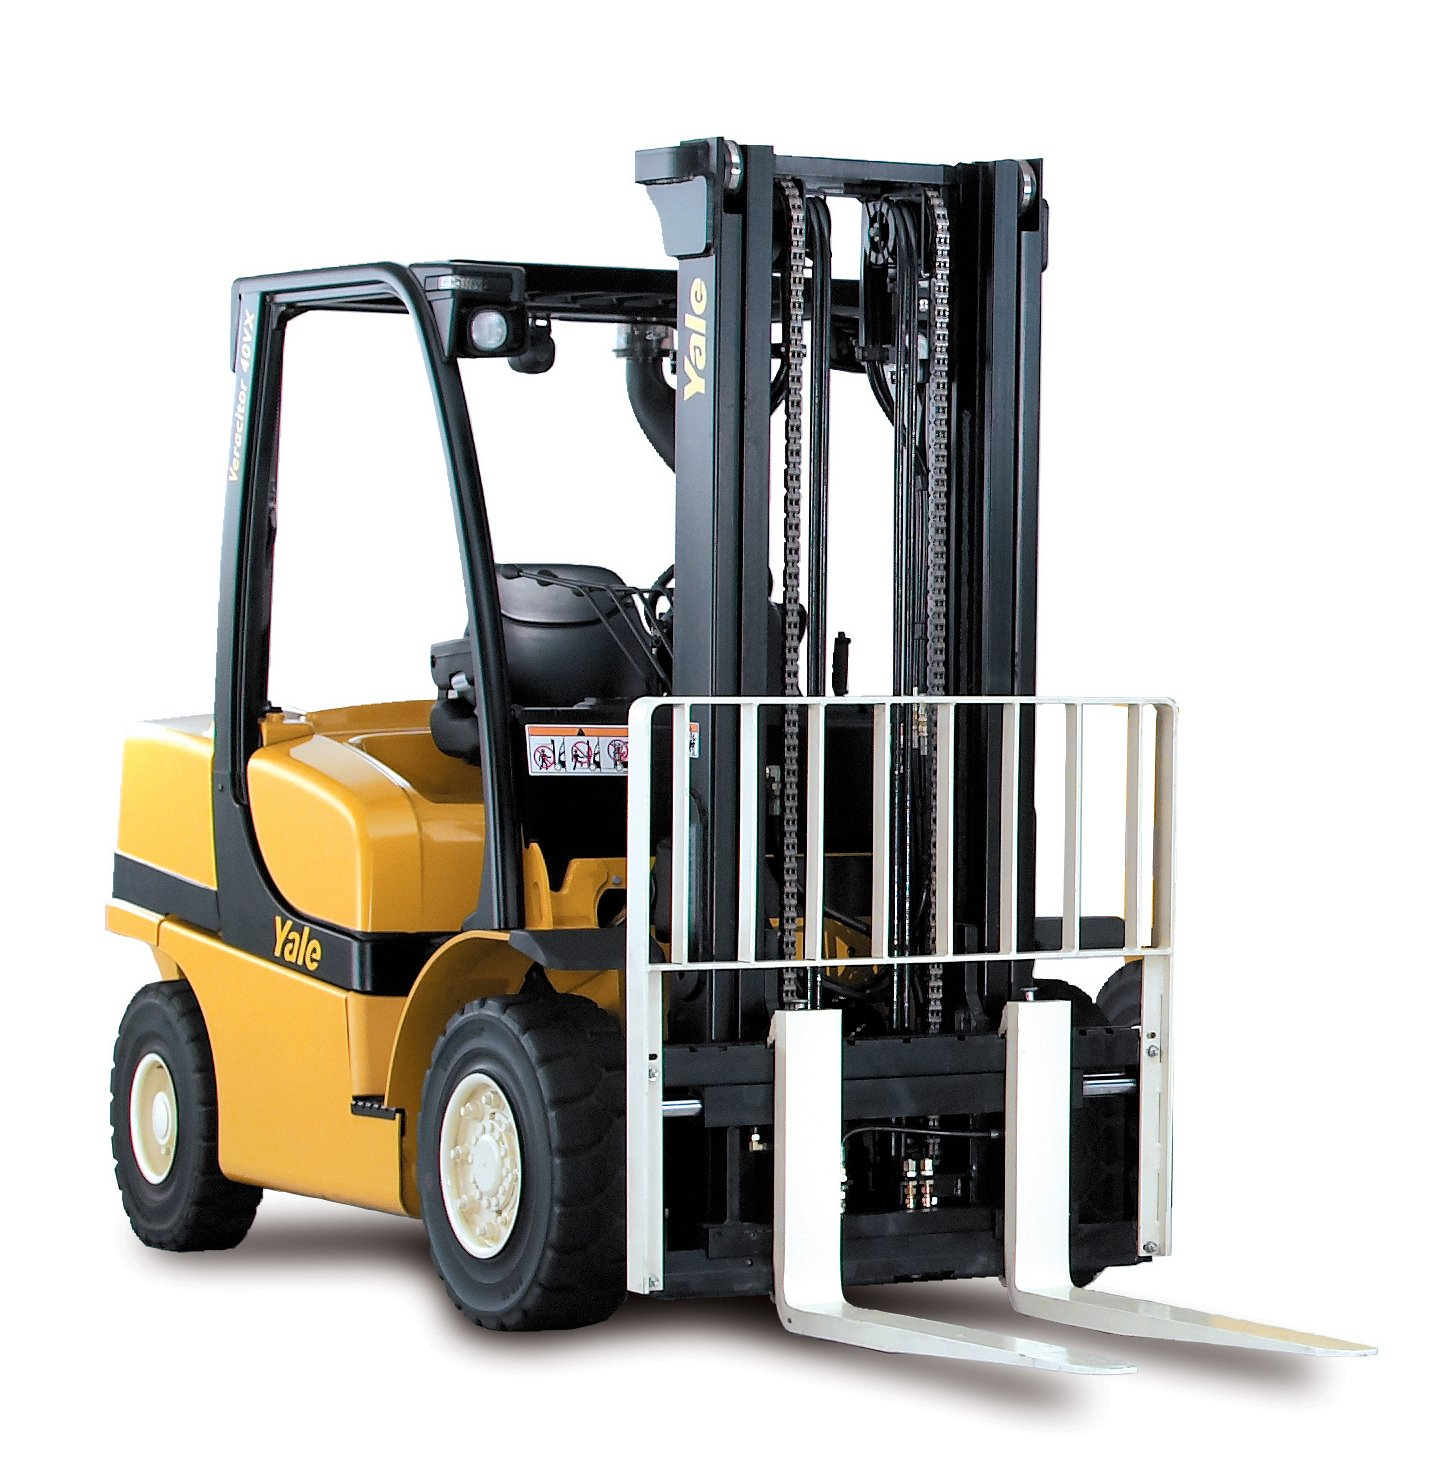 Yale counterbalance forklift